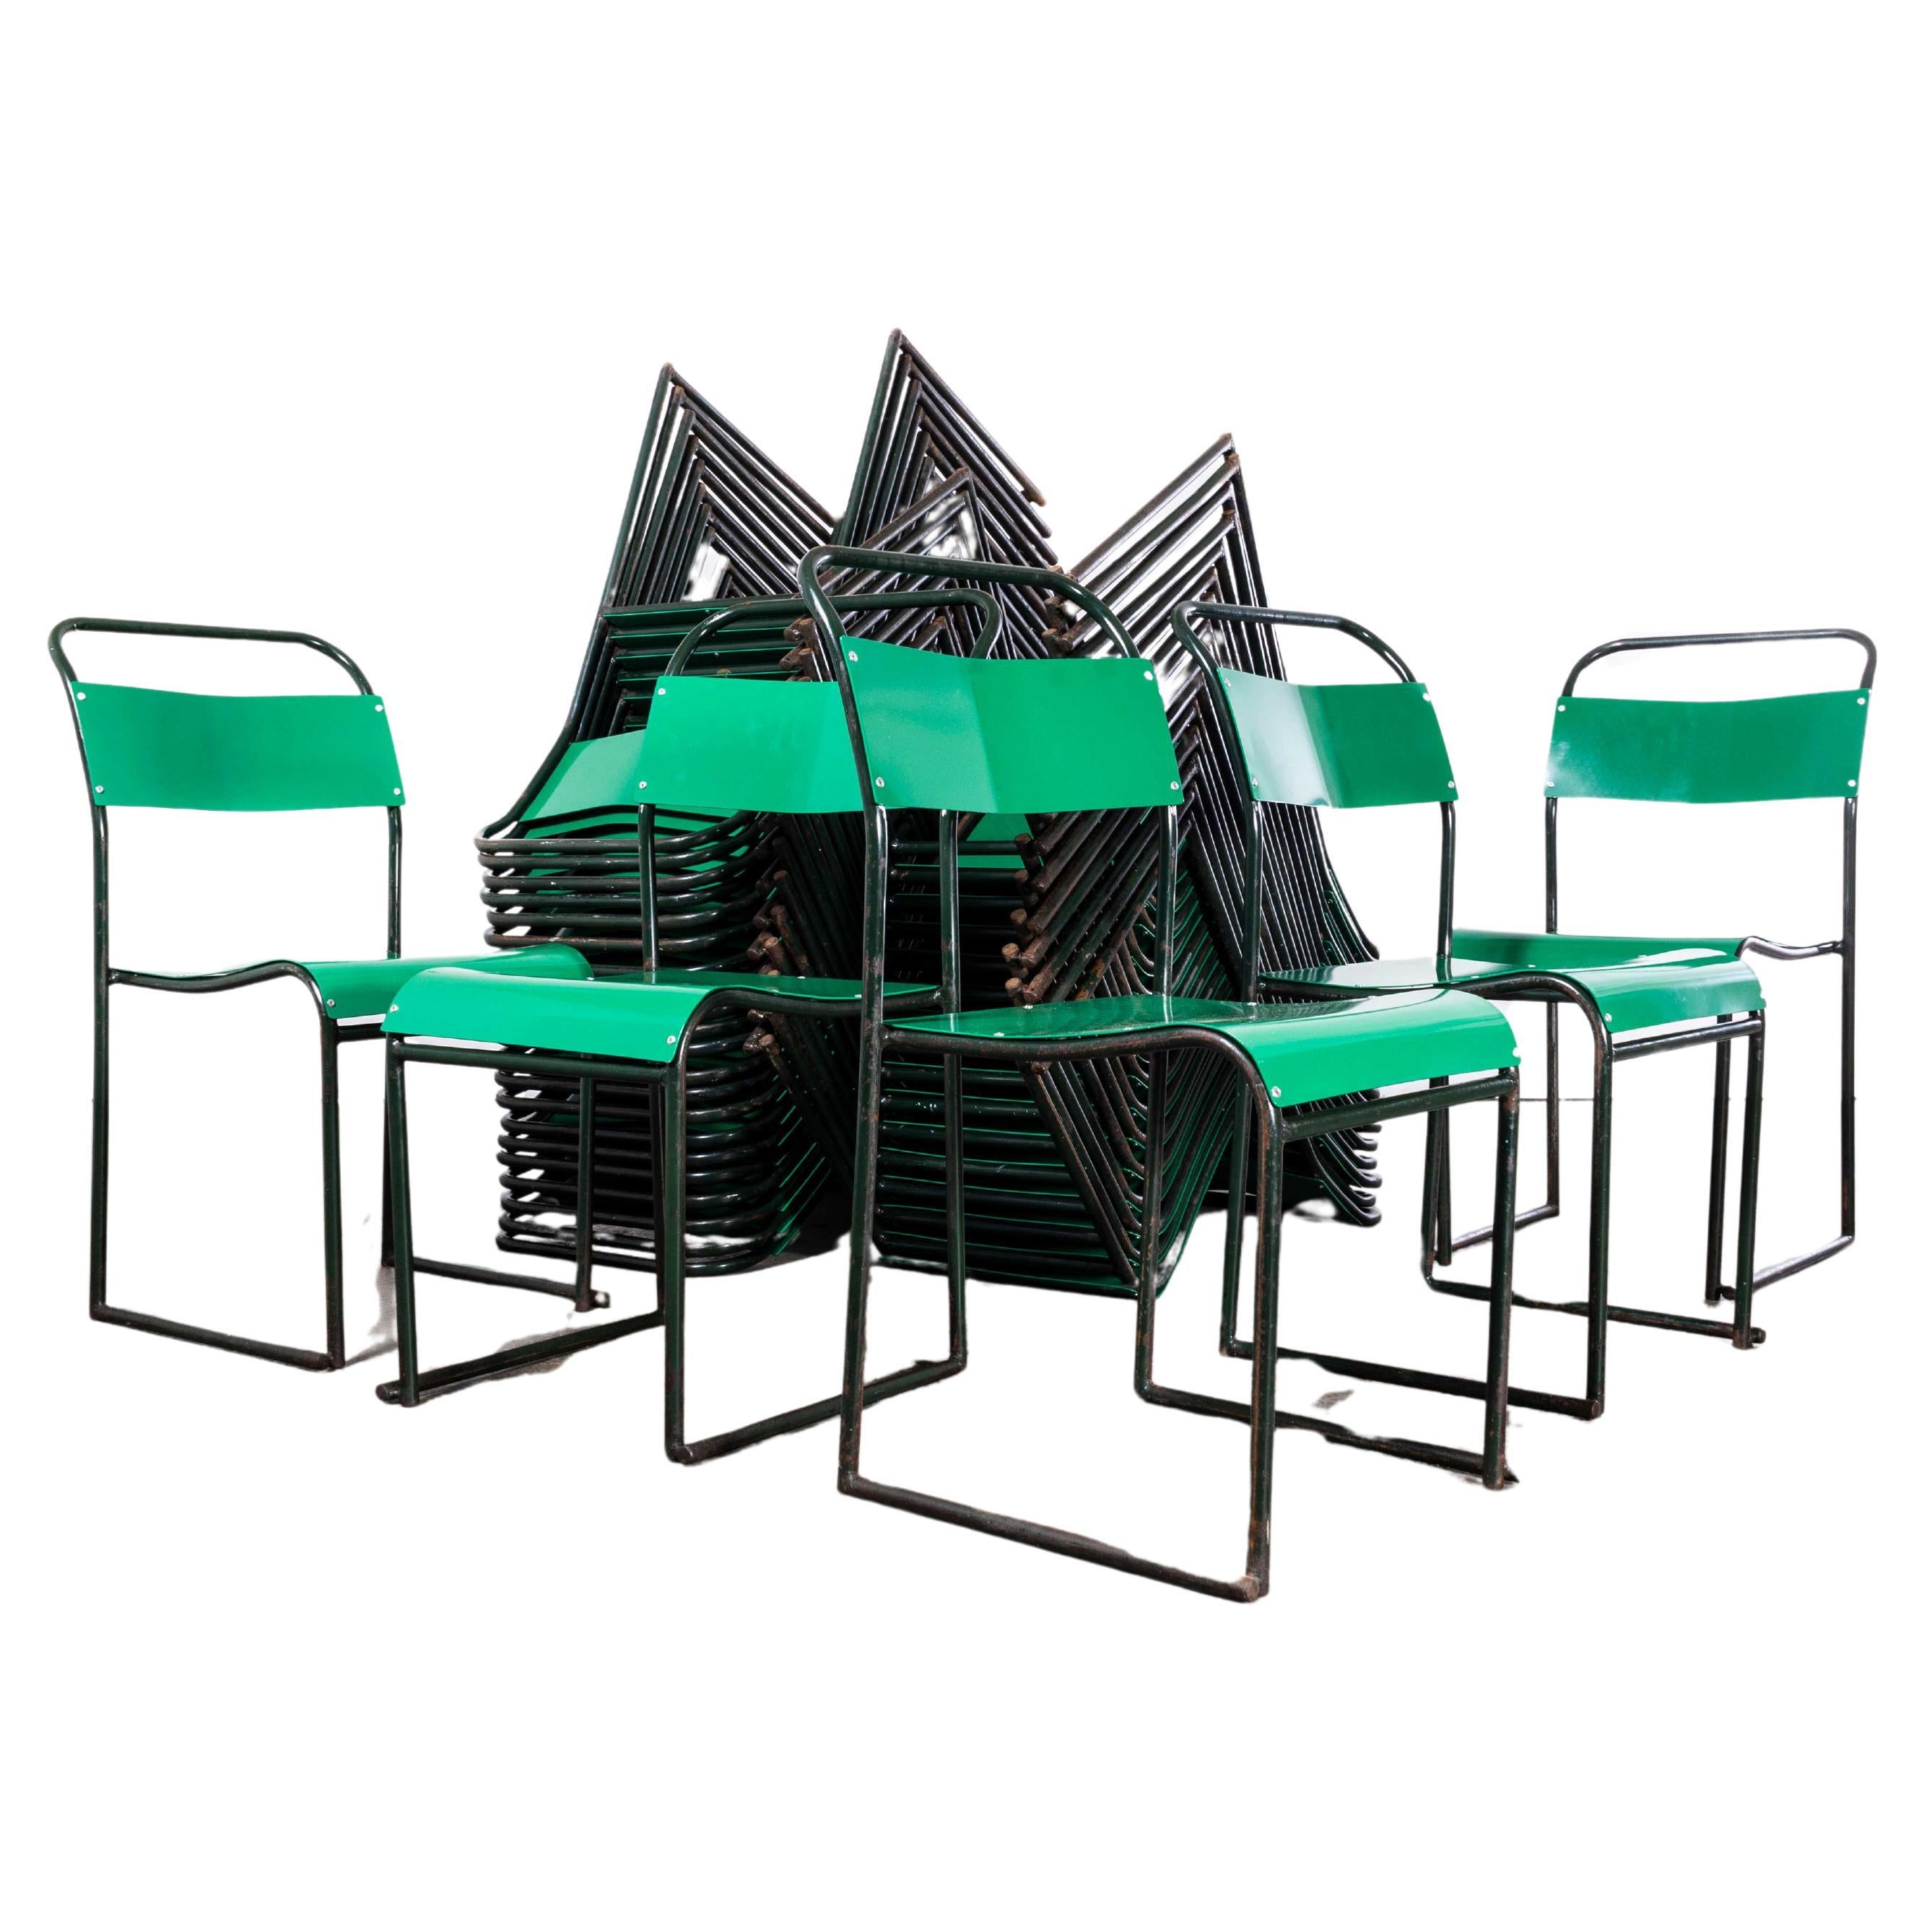 1950’s Pel – Cox Tubular Metal Outdoor Dining Chairs With Green Seats – Quantity For Sale